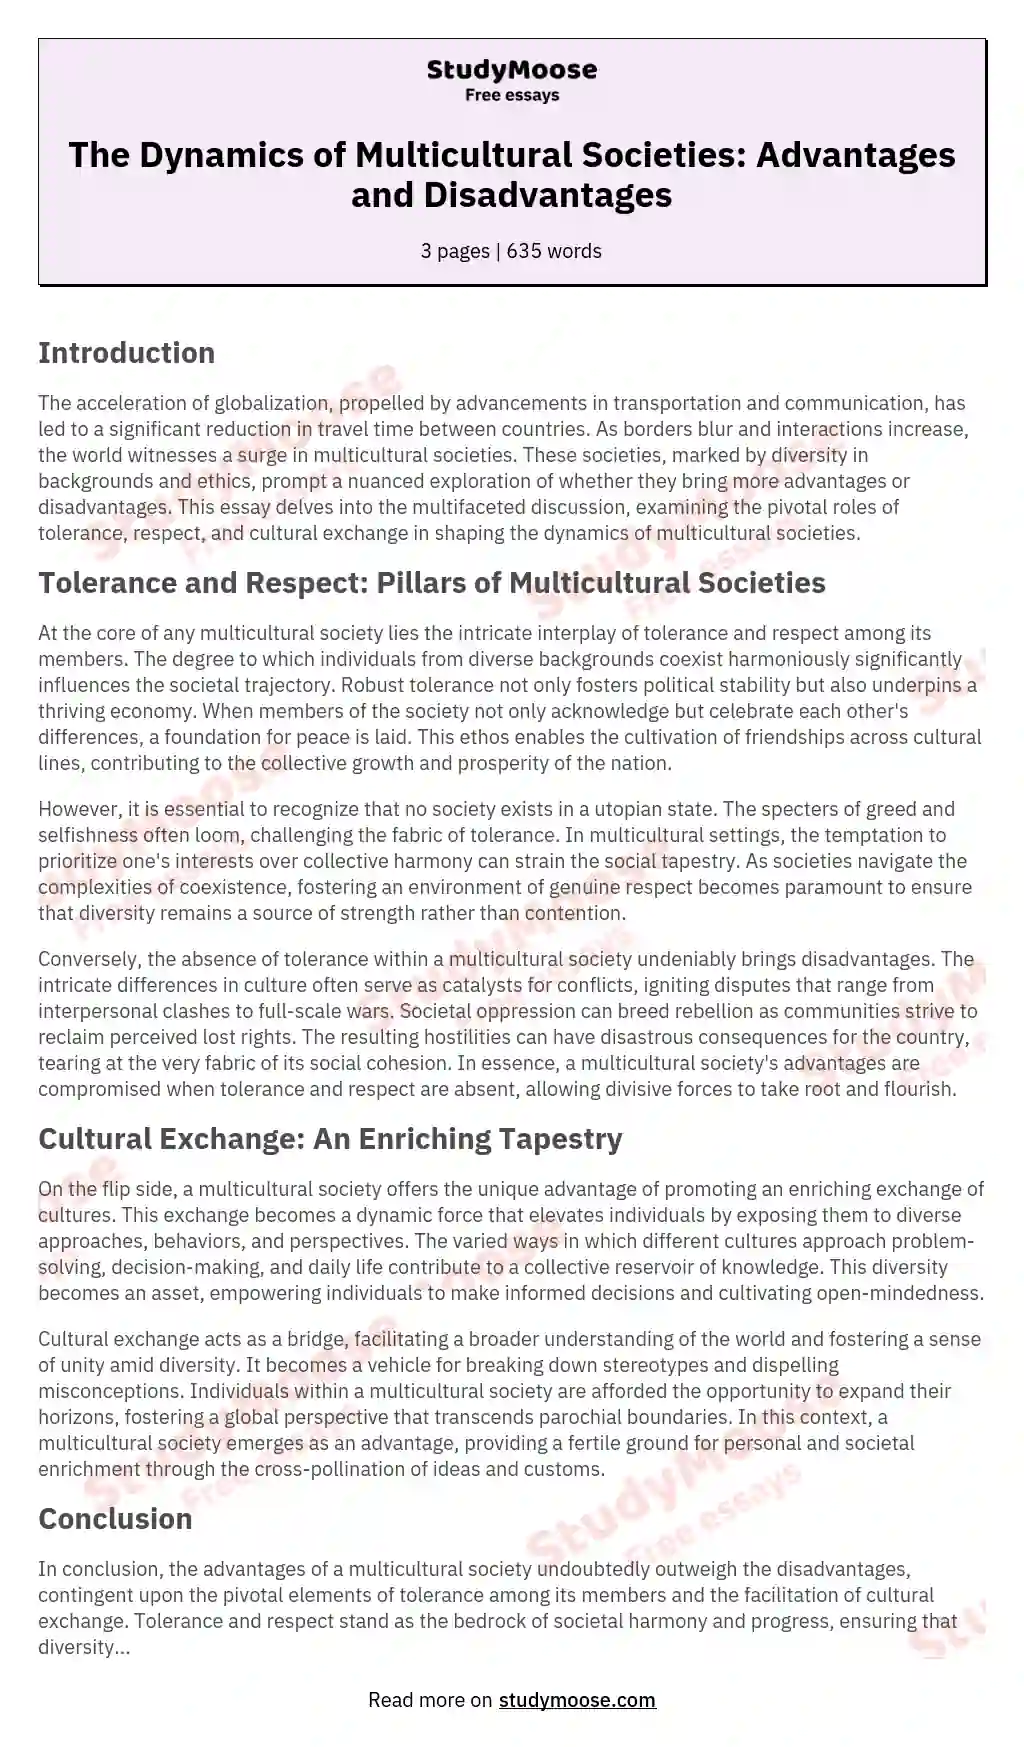 The Dynamics of Multicultural Societies: Advantages and Disadvantages essay